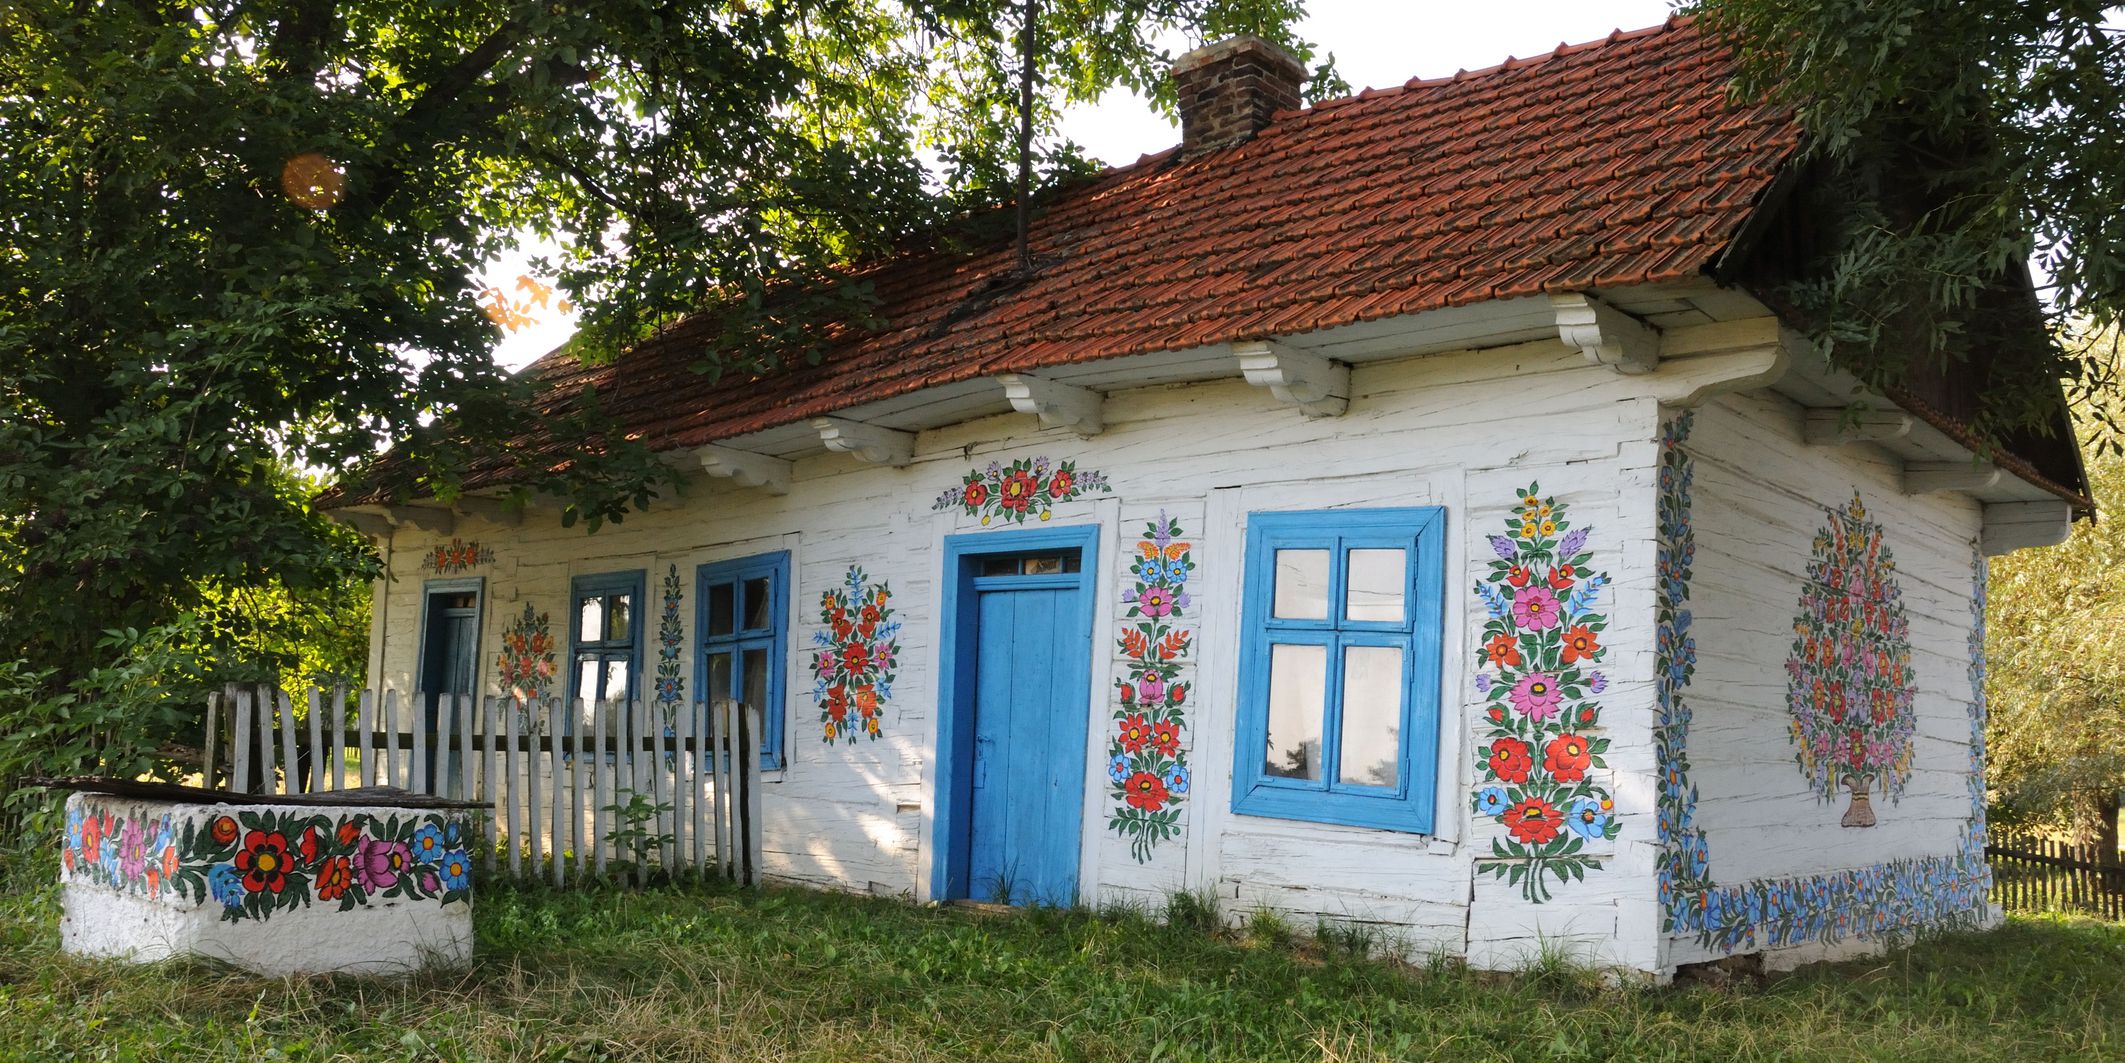 The Painted Village of Zalipie, Poland - Country Living